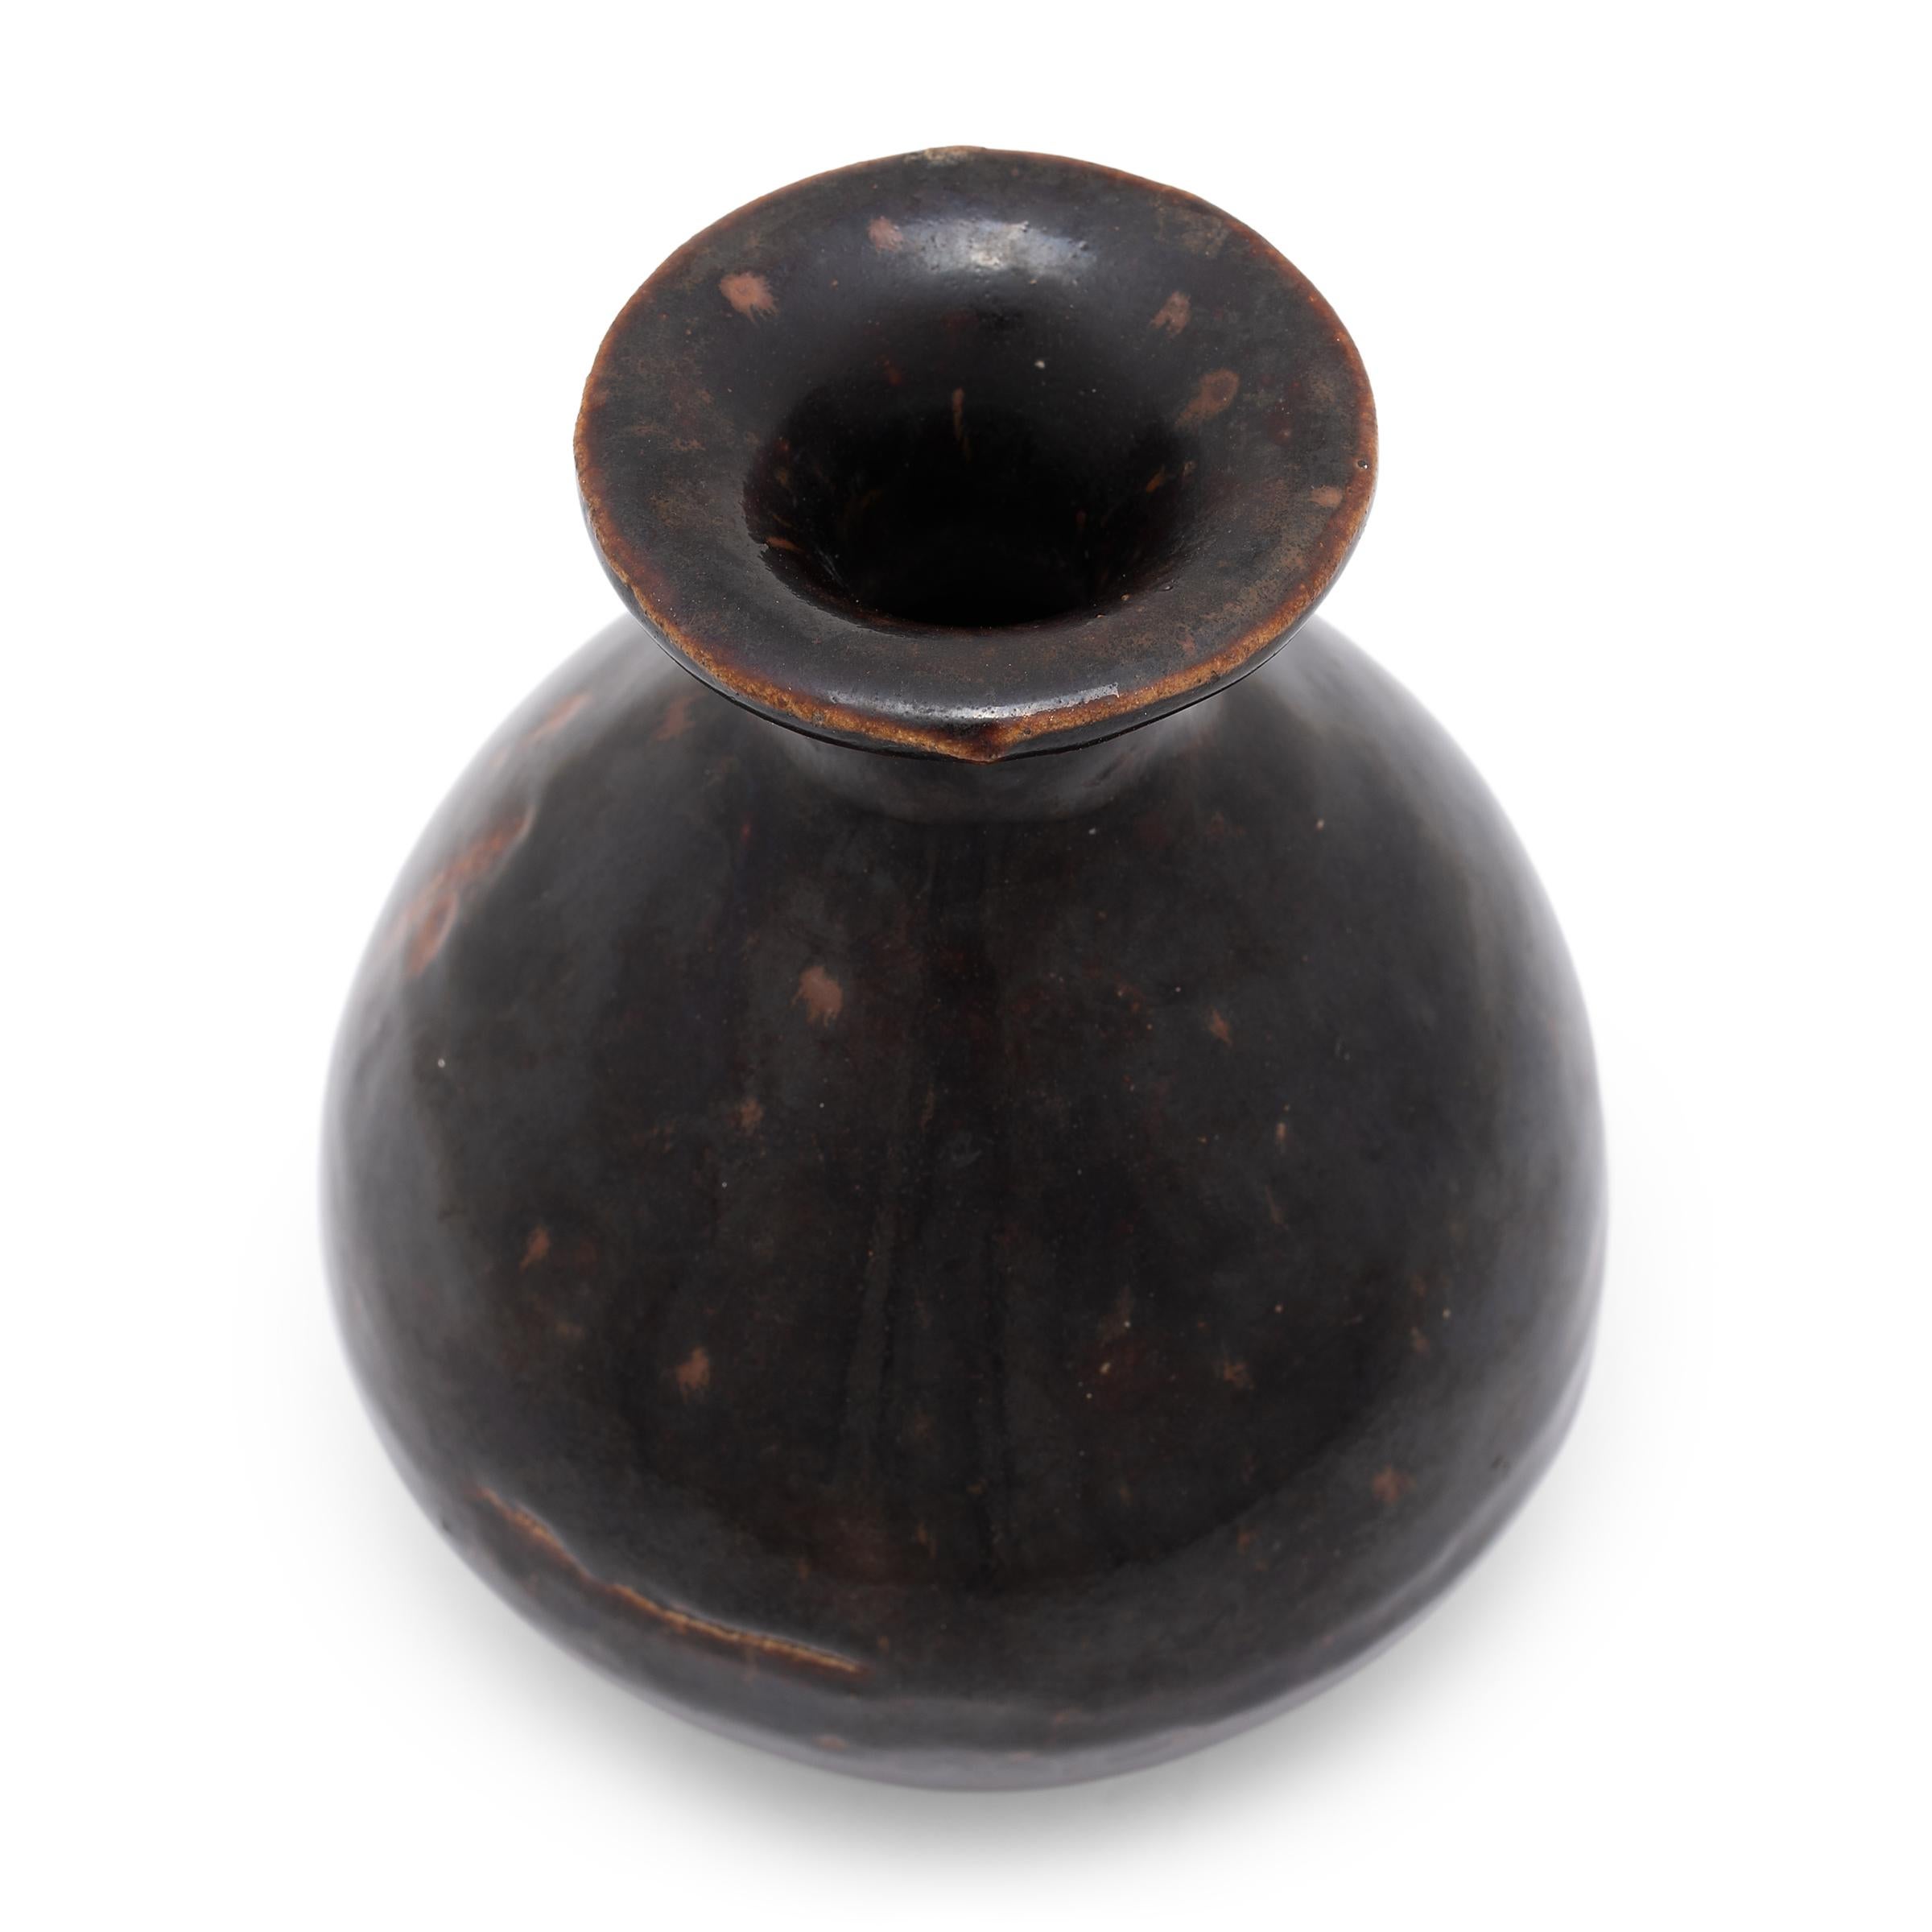 This 19th-century wine jar is cloaked inside and out with a rich, dark brown glaze that sheets across its rounded form, lingering beautifully on every imperfection. The jar's sculptural shape is known as a yuhuchunping or pear-shaped vase, defined